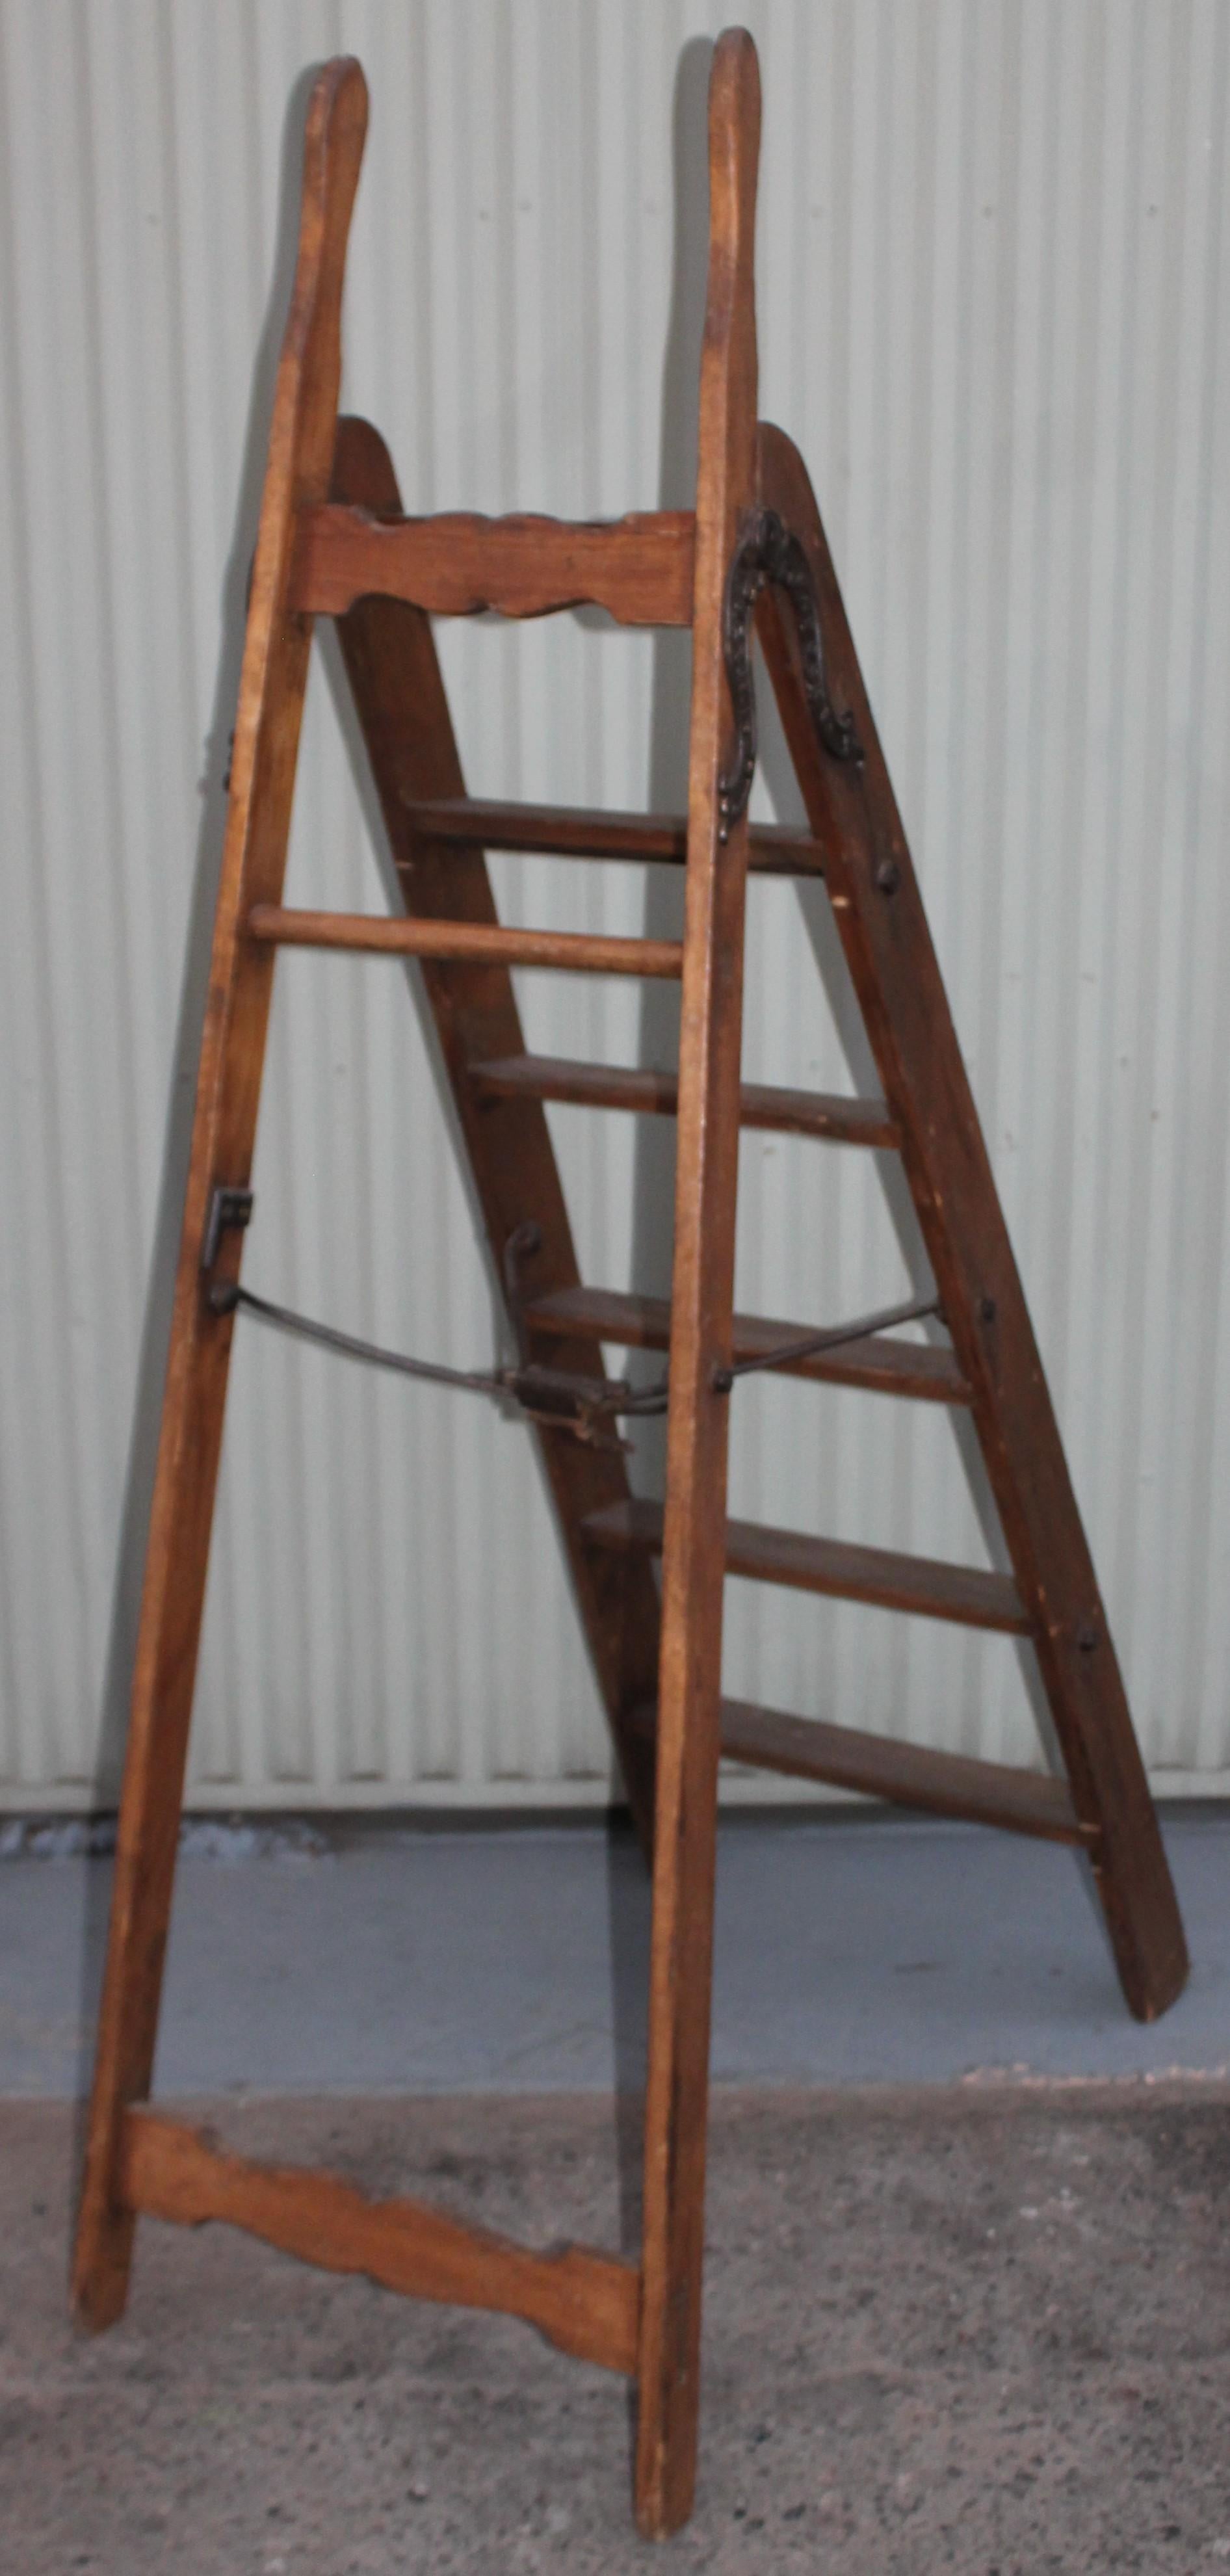 Hand-Crafted 19th Century Library Ladder with Original Iron Hardware